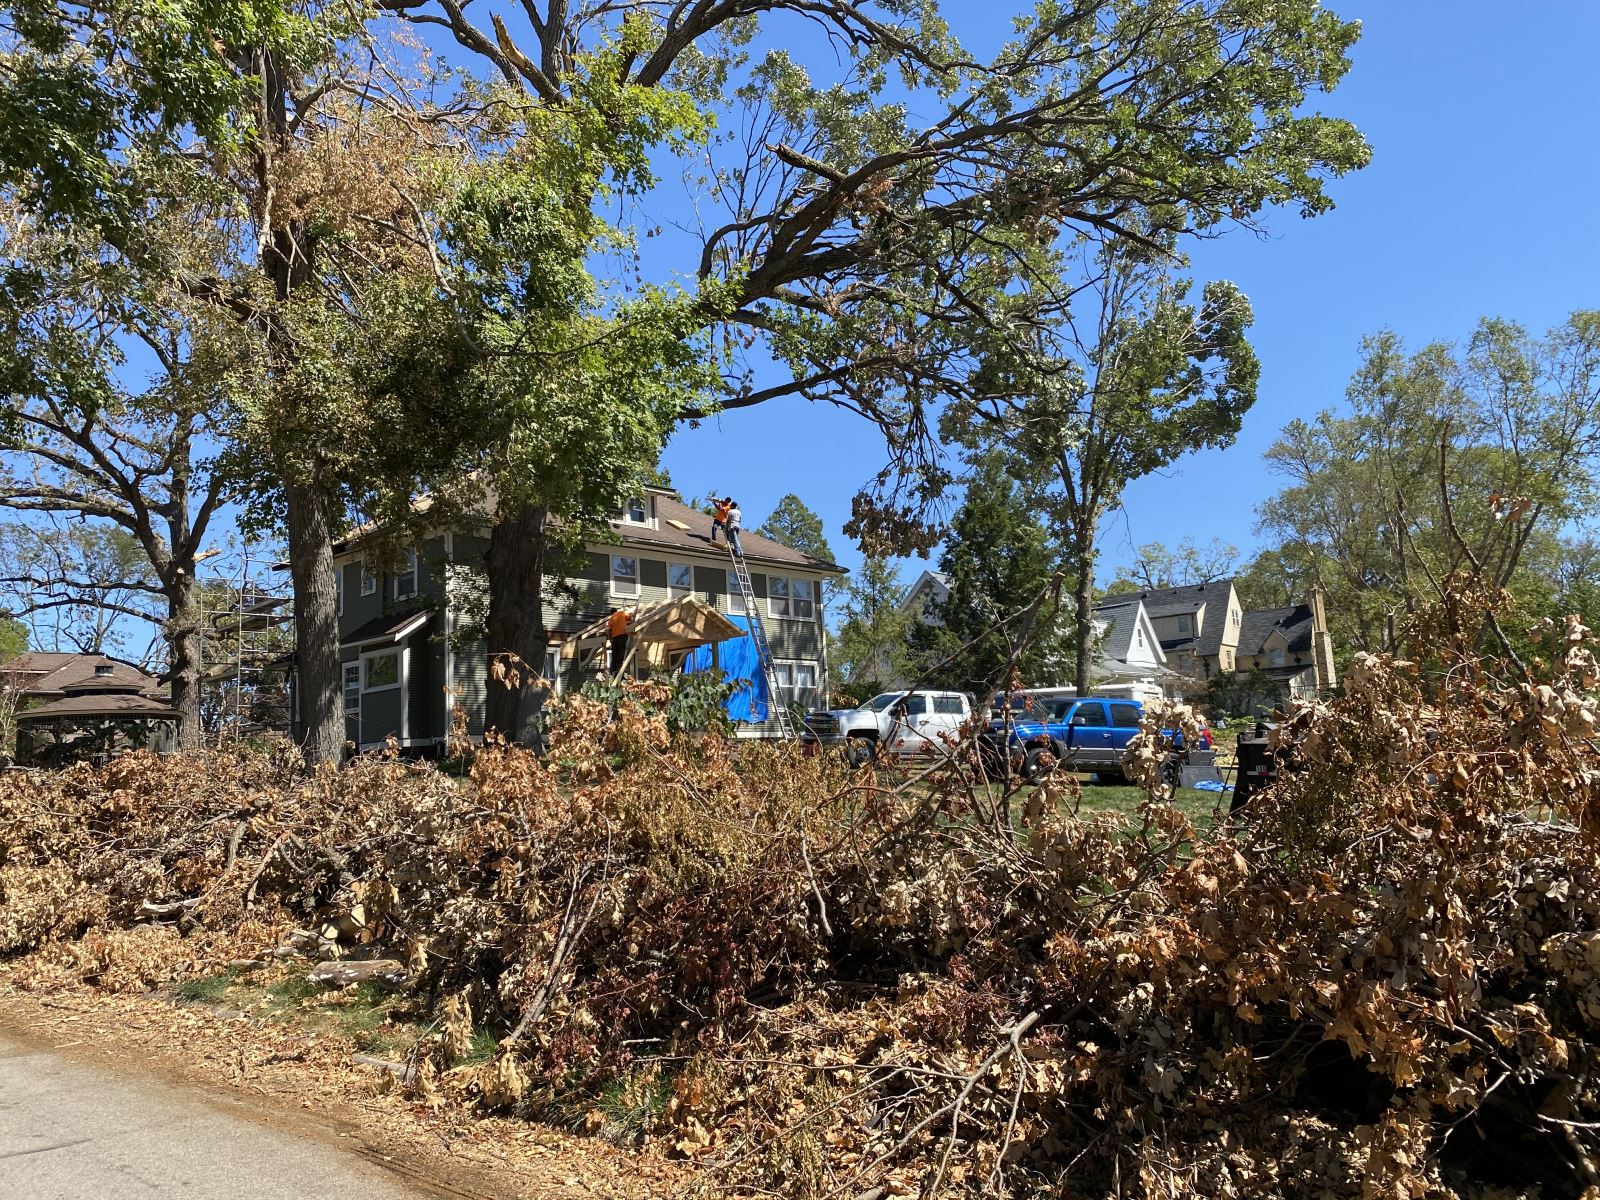 Downed trees in front of a Cedar Rapids home, August 2020